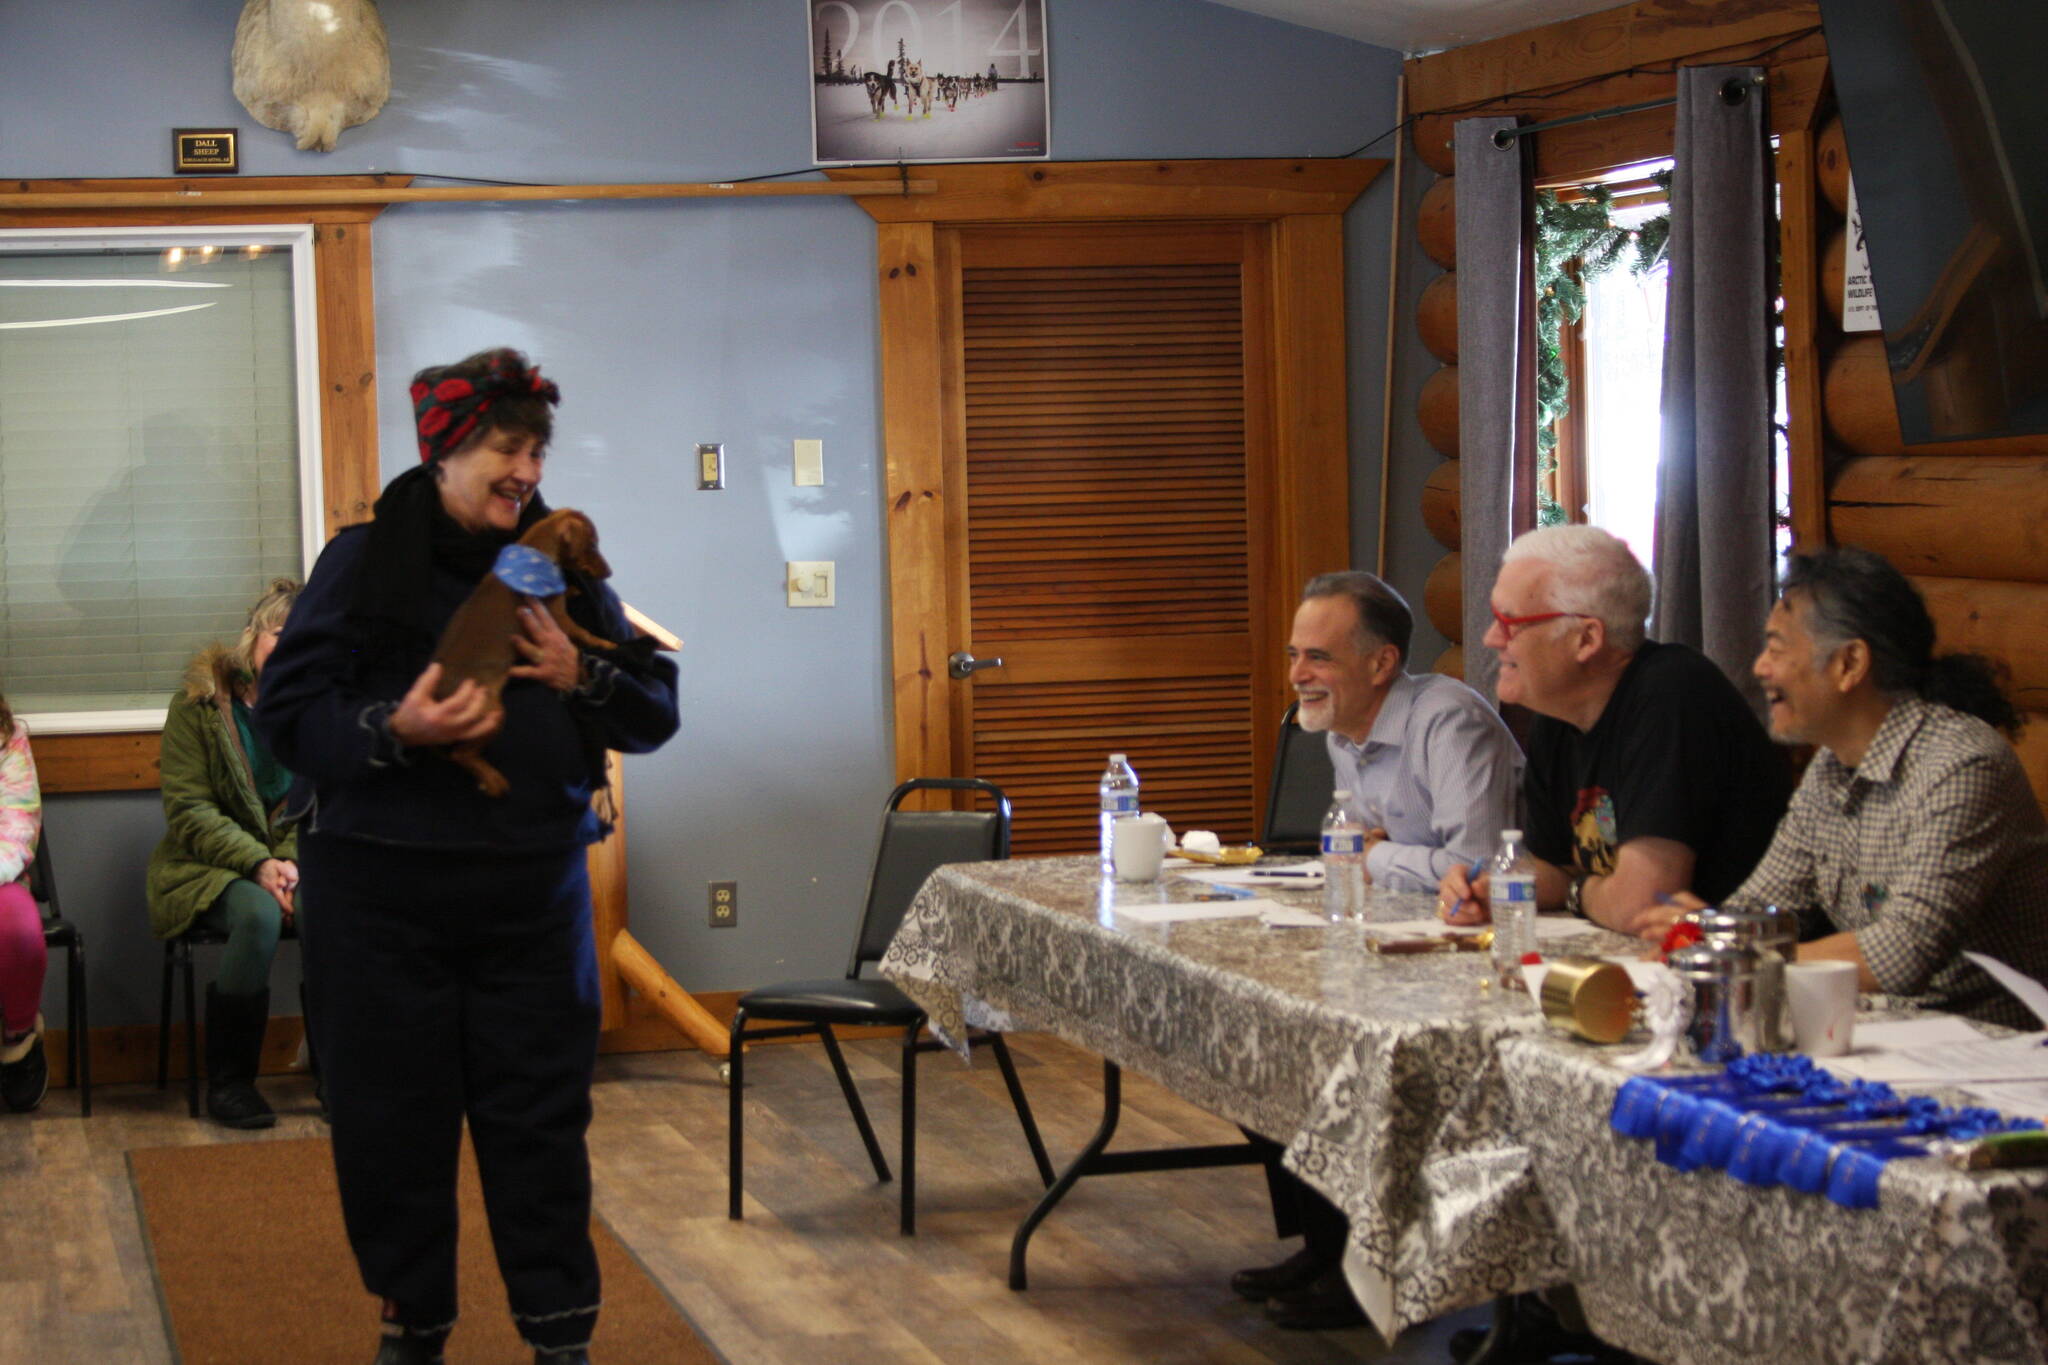 “Smallest dog” award winner, chiweenie Sammy, is held by his owner Sue Loveland in front of the judges’ table during the Snow Rondi dog show on Sunday, March 5 at the Anchor Point Senior Center in Anchor Point, Alaska. Photo by Delcenia Cosman